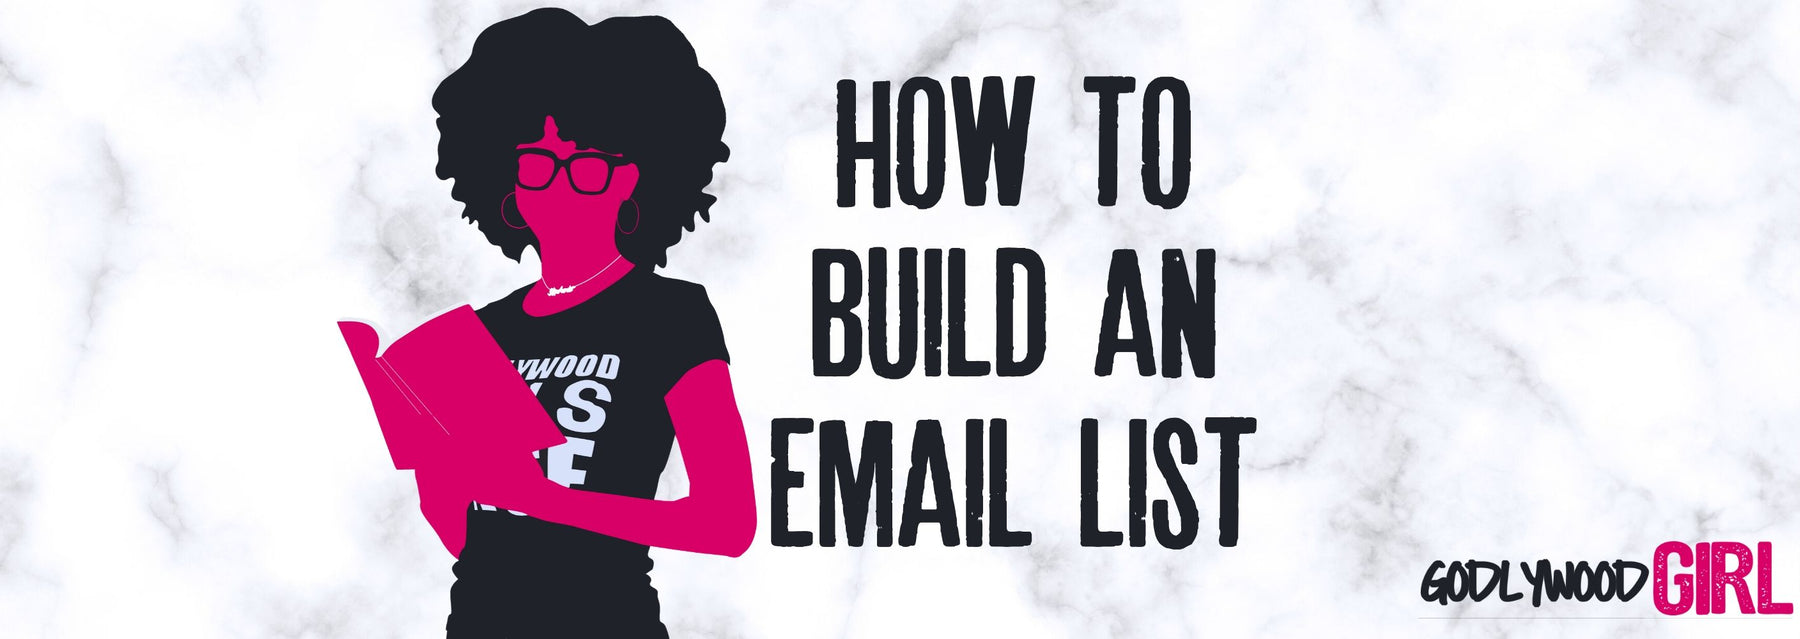 HOW TO BUILD AN EMAIL LIST (Christian Entrepreneur Series) | HOW TO